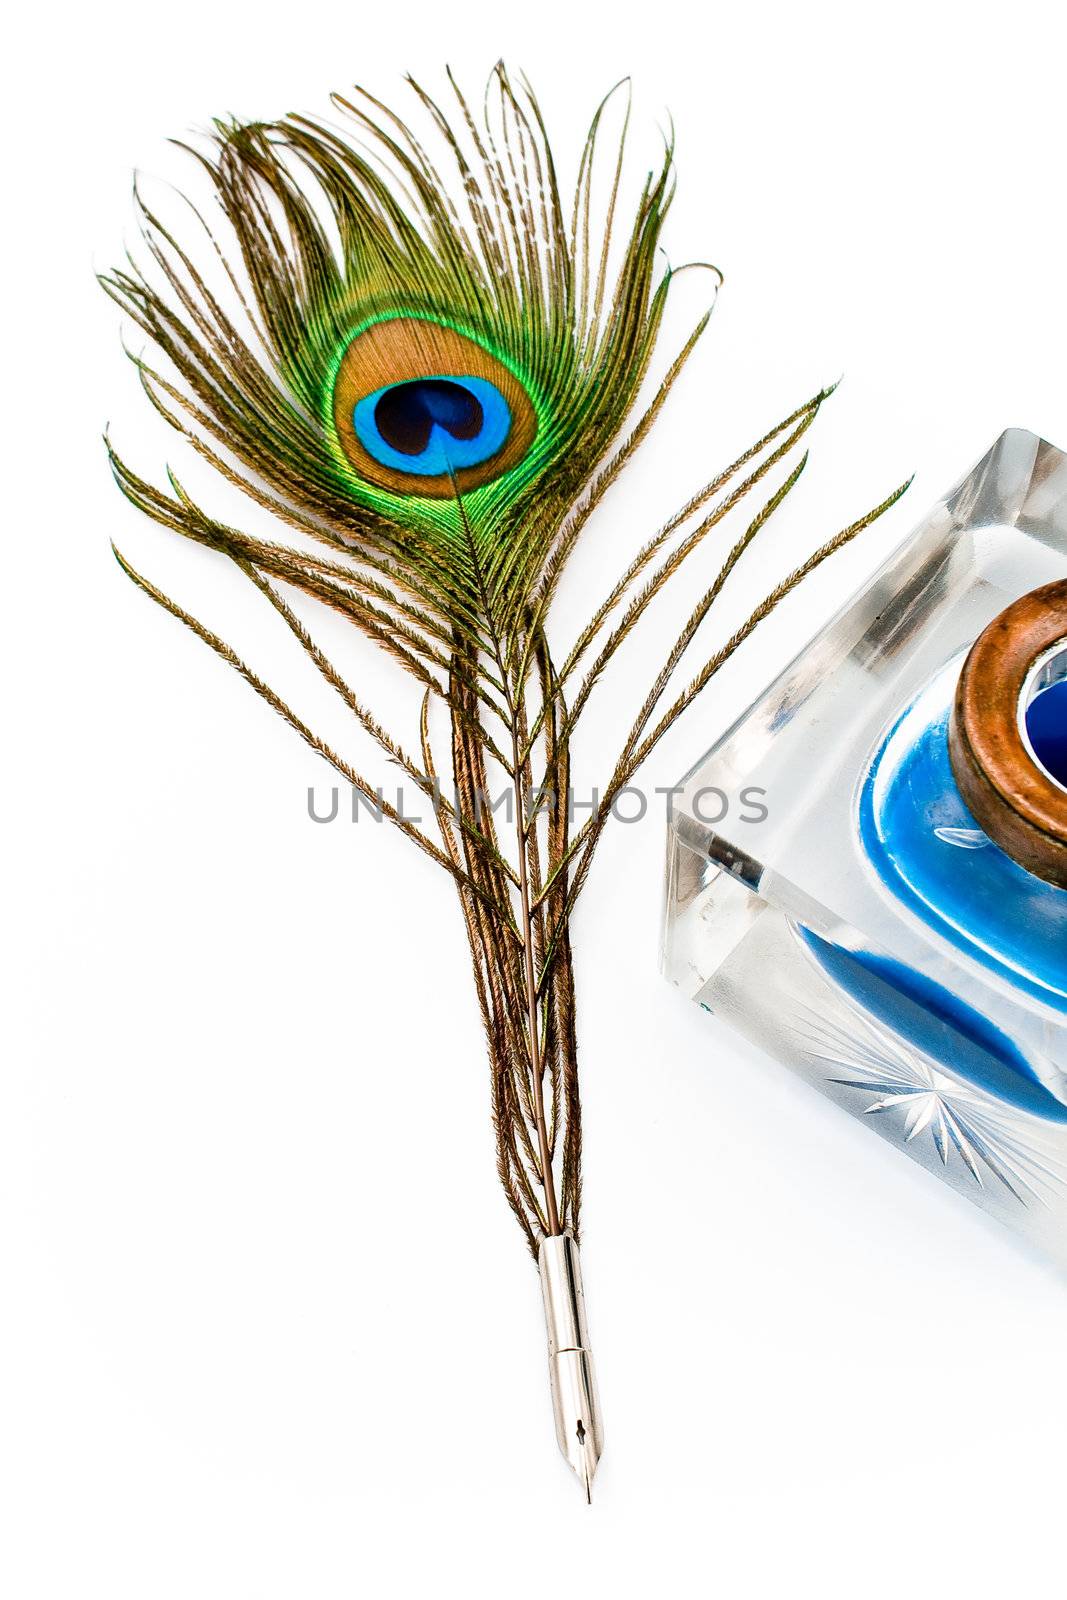 Peacock feather quill and inkwell isolated on white